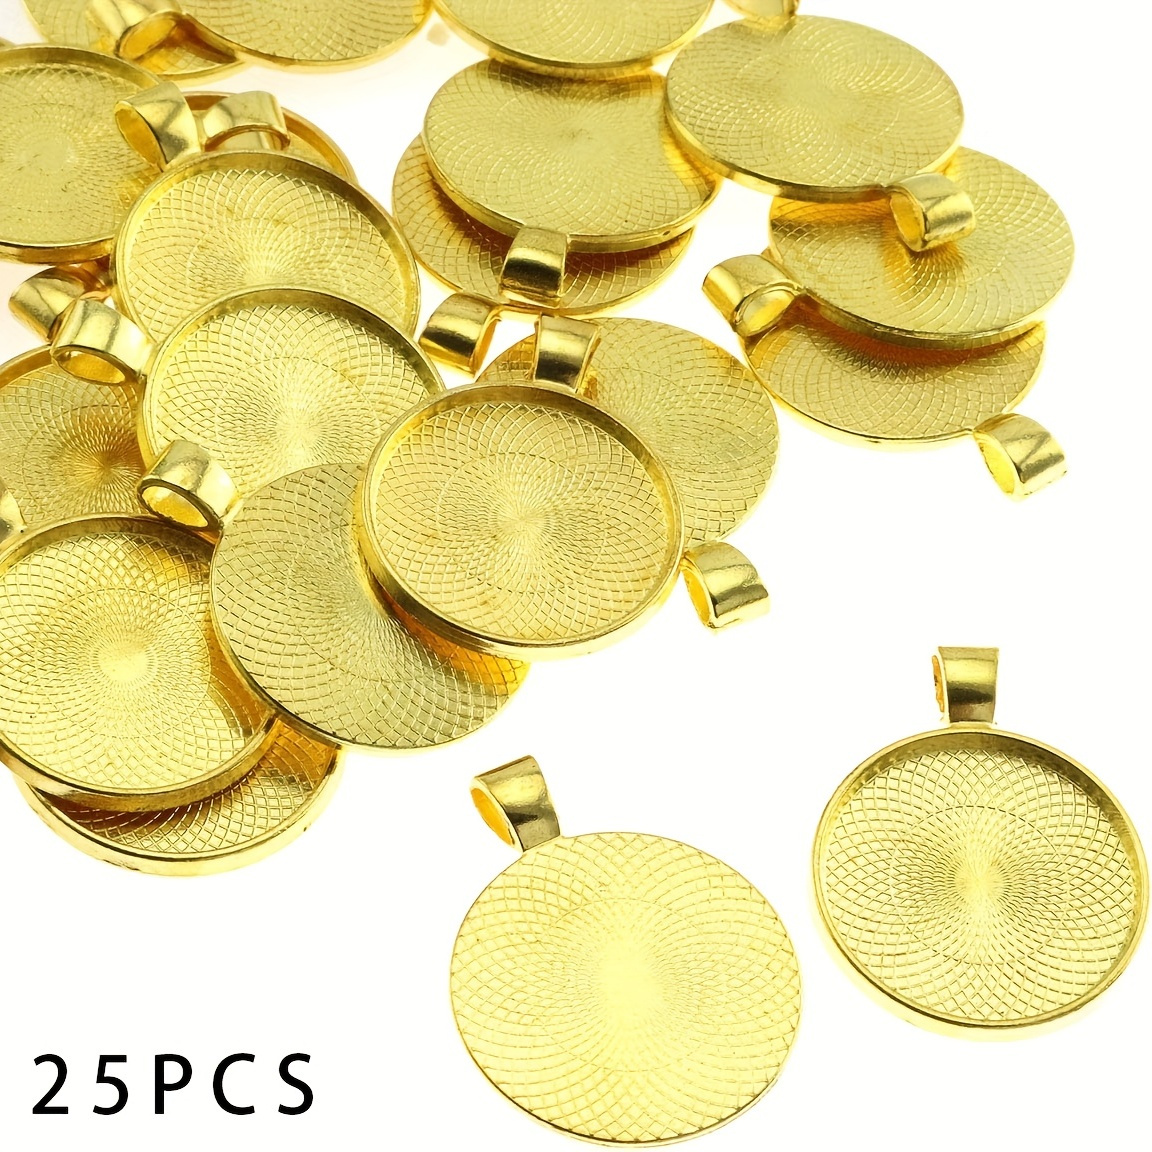 20PCS 25mm Keychain Cabochon Base Setting Trays Bezel Supplies For Handmade Key  Chain DIY Making Jewelry Findings Accessories